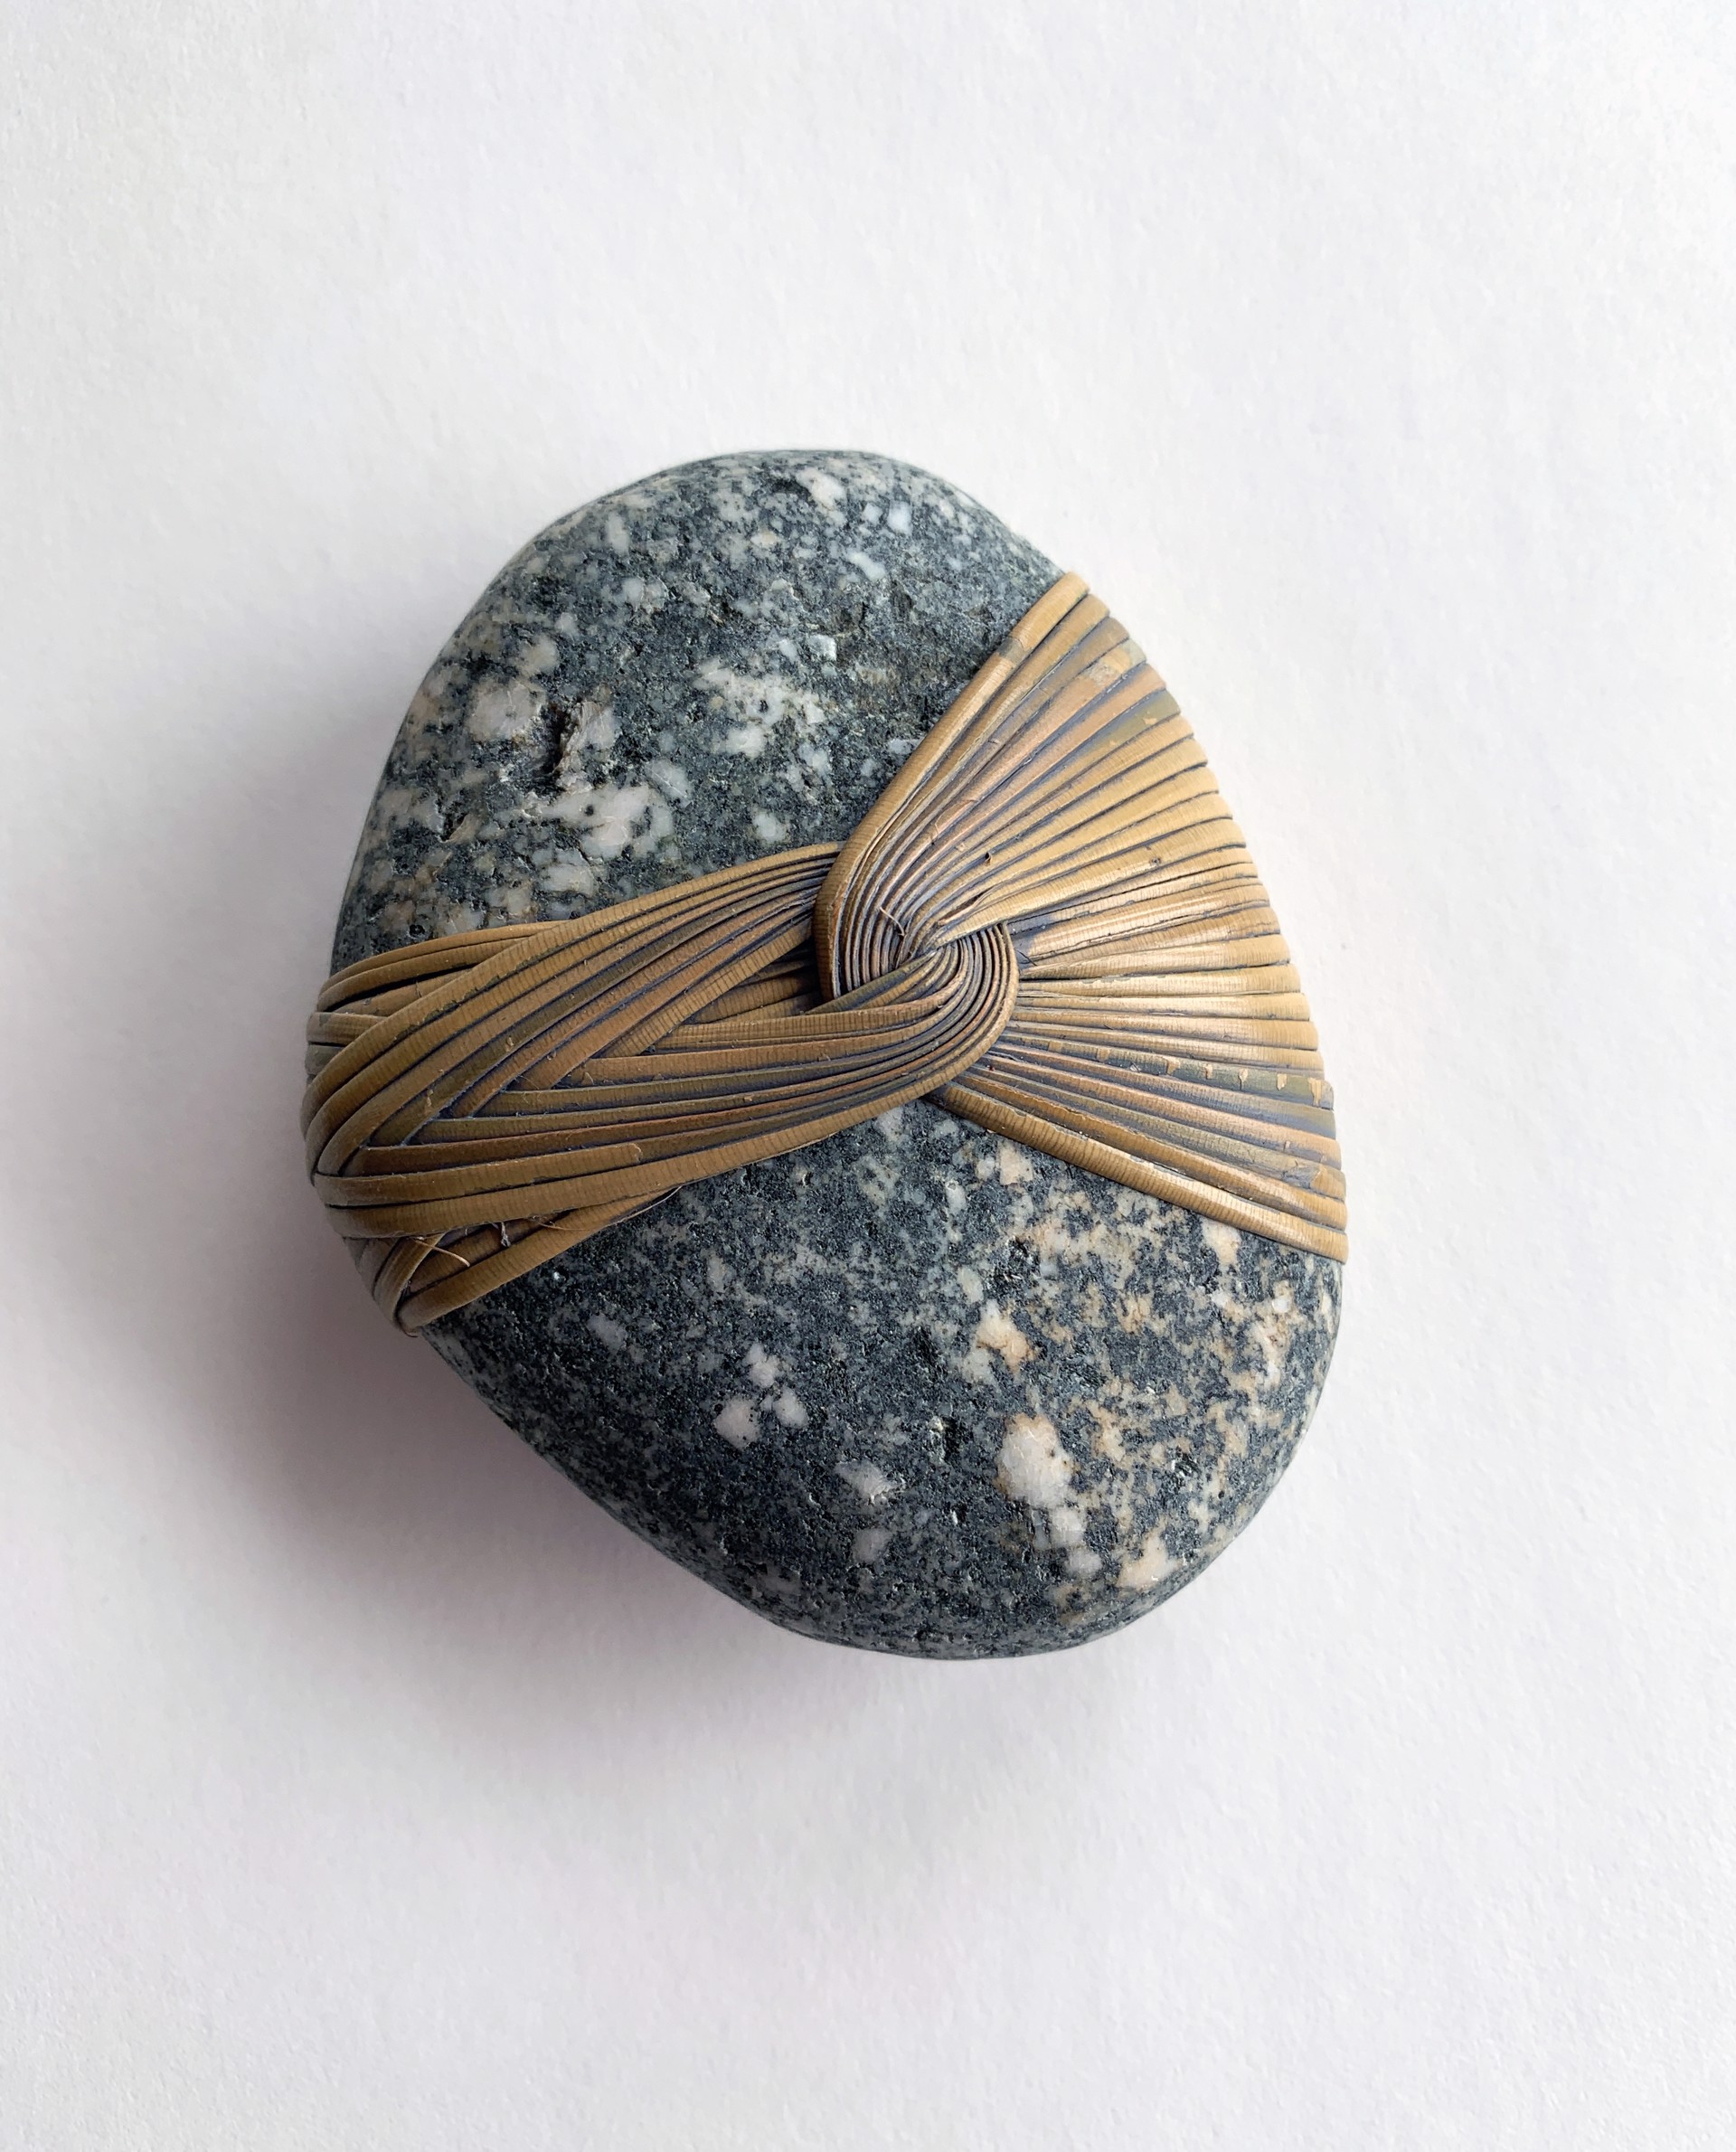 Small Blessing Stone 8 by Deloss Webber